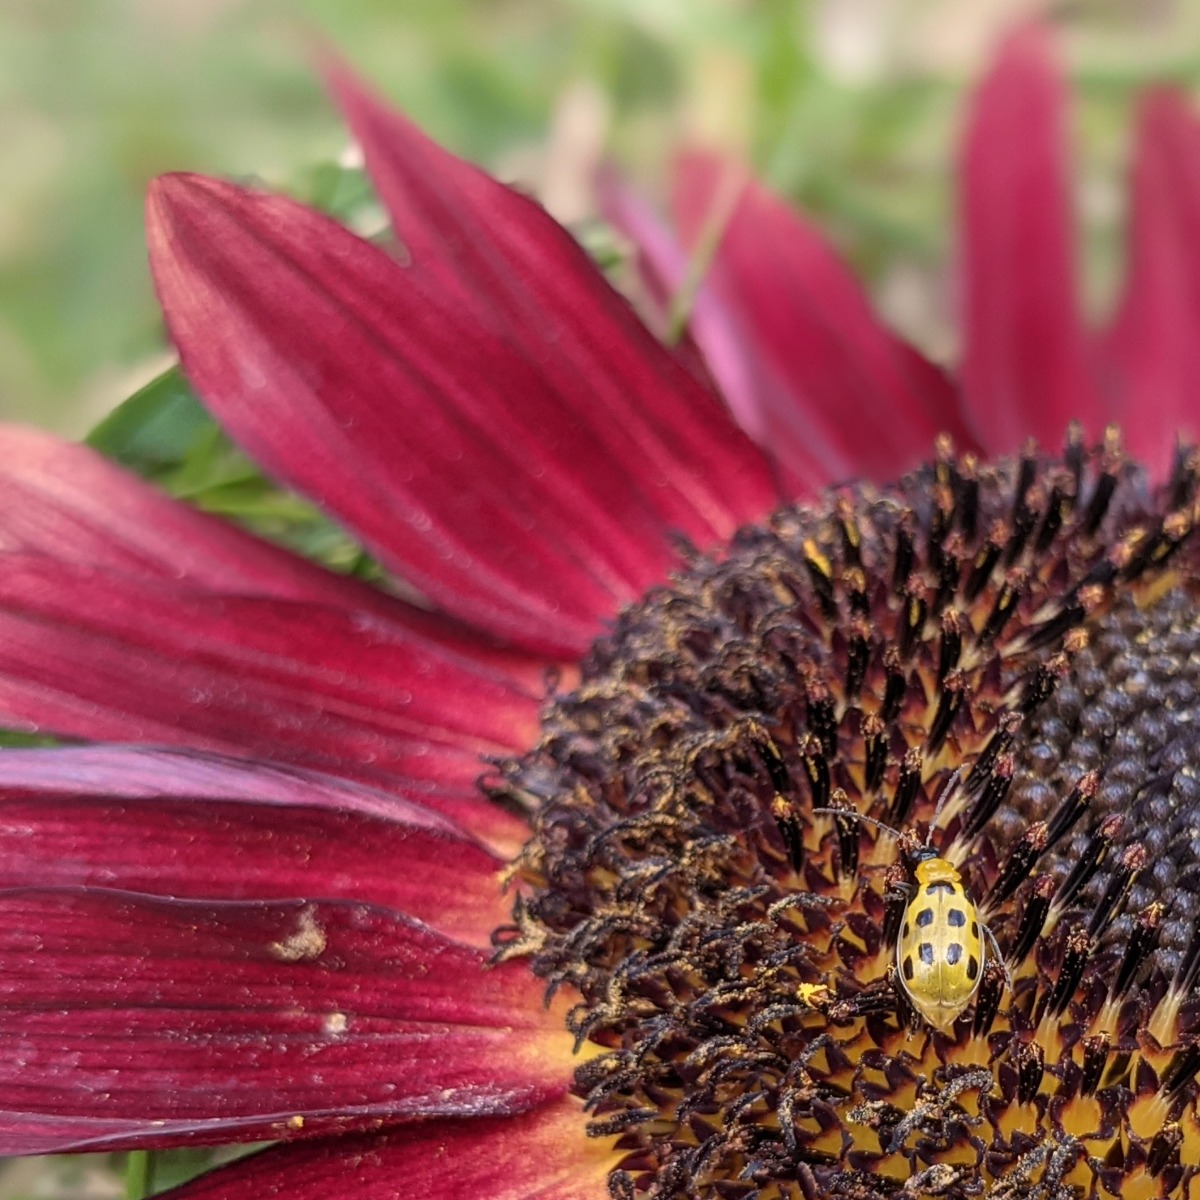 Spotted Cucumber Beetle on Red Sunflower